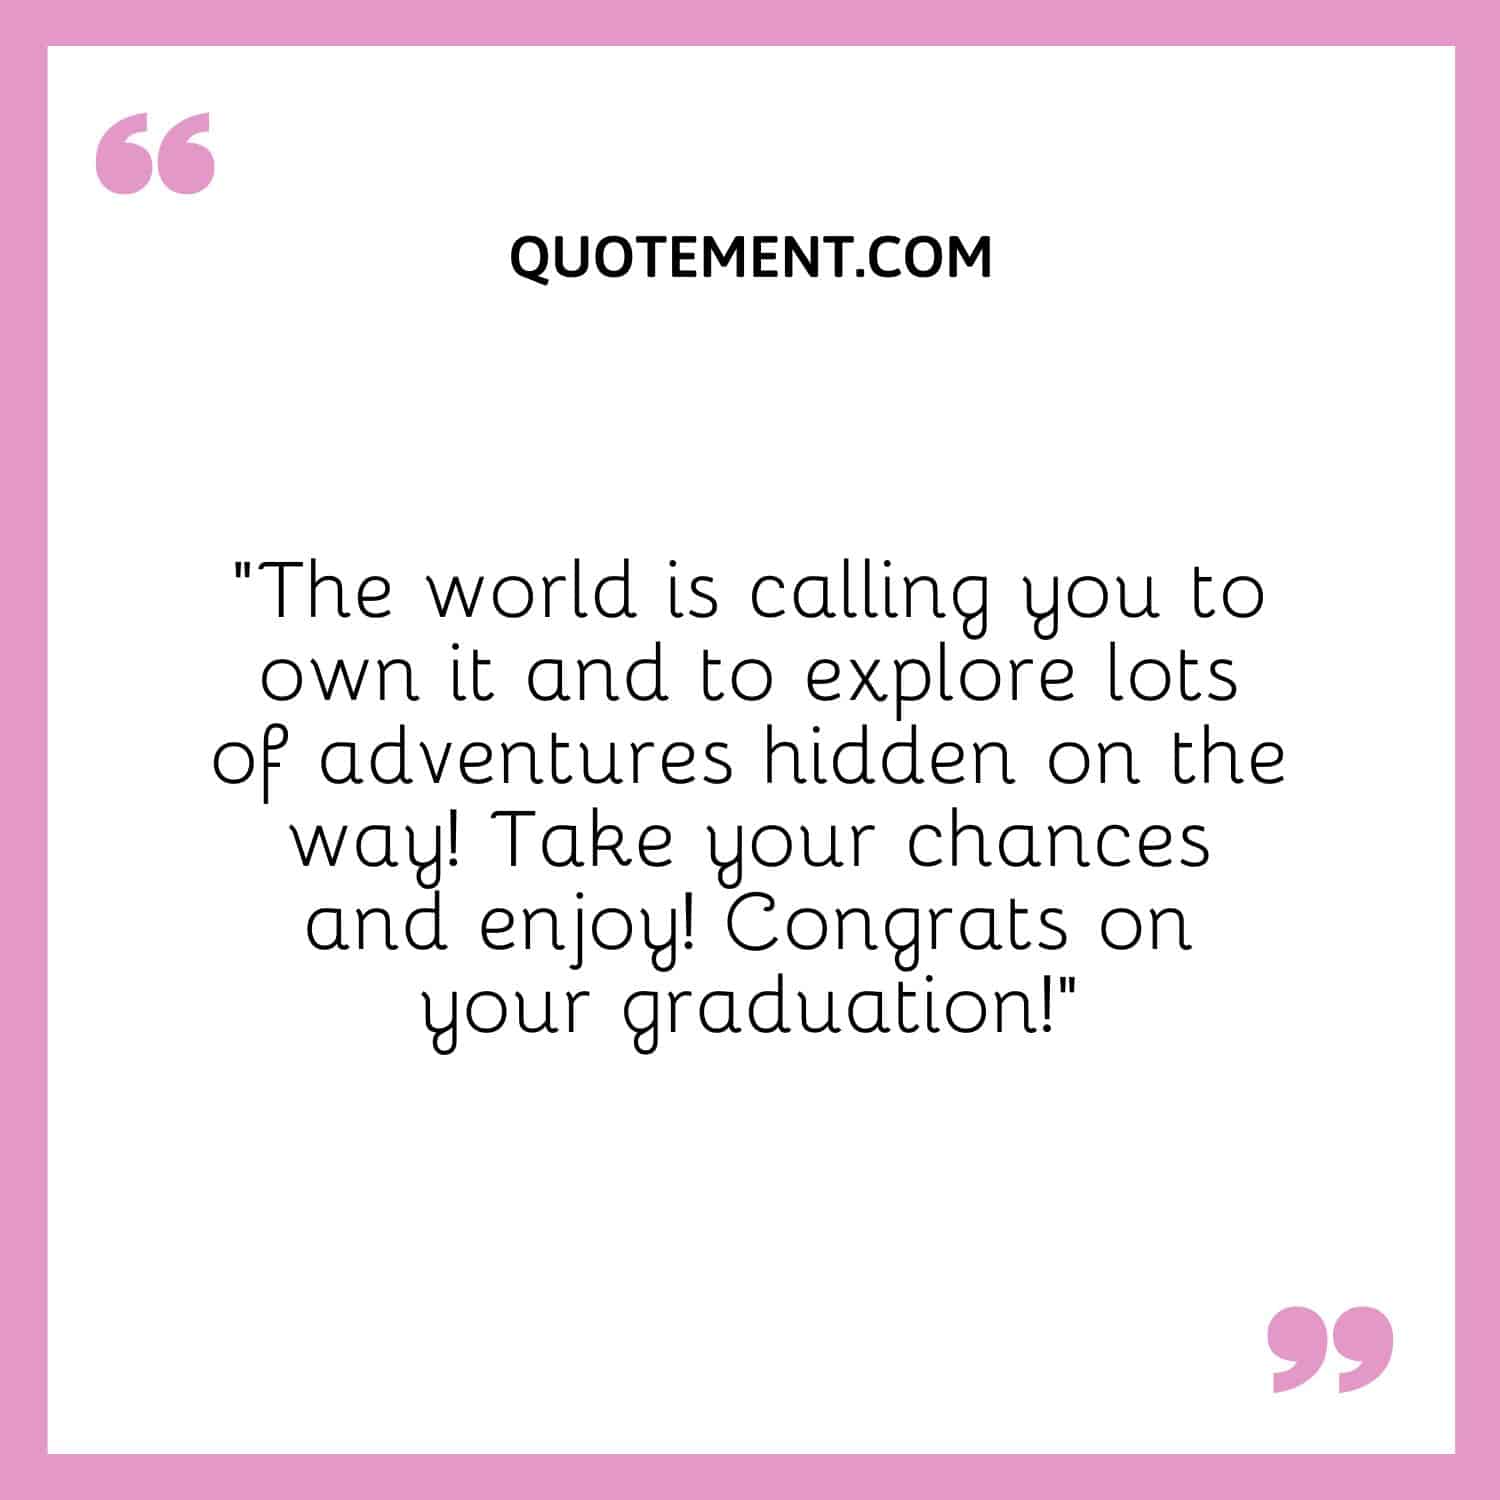 “The world is calling you to own it and to explore lots of adventures hidden on the way! Take your chances and enjoy! Congrats on your graduation!” 